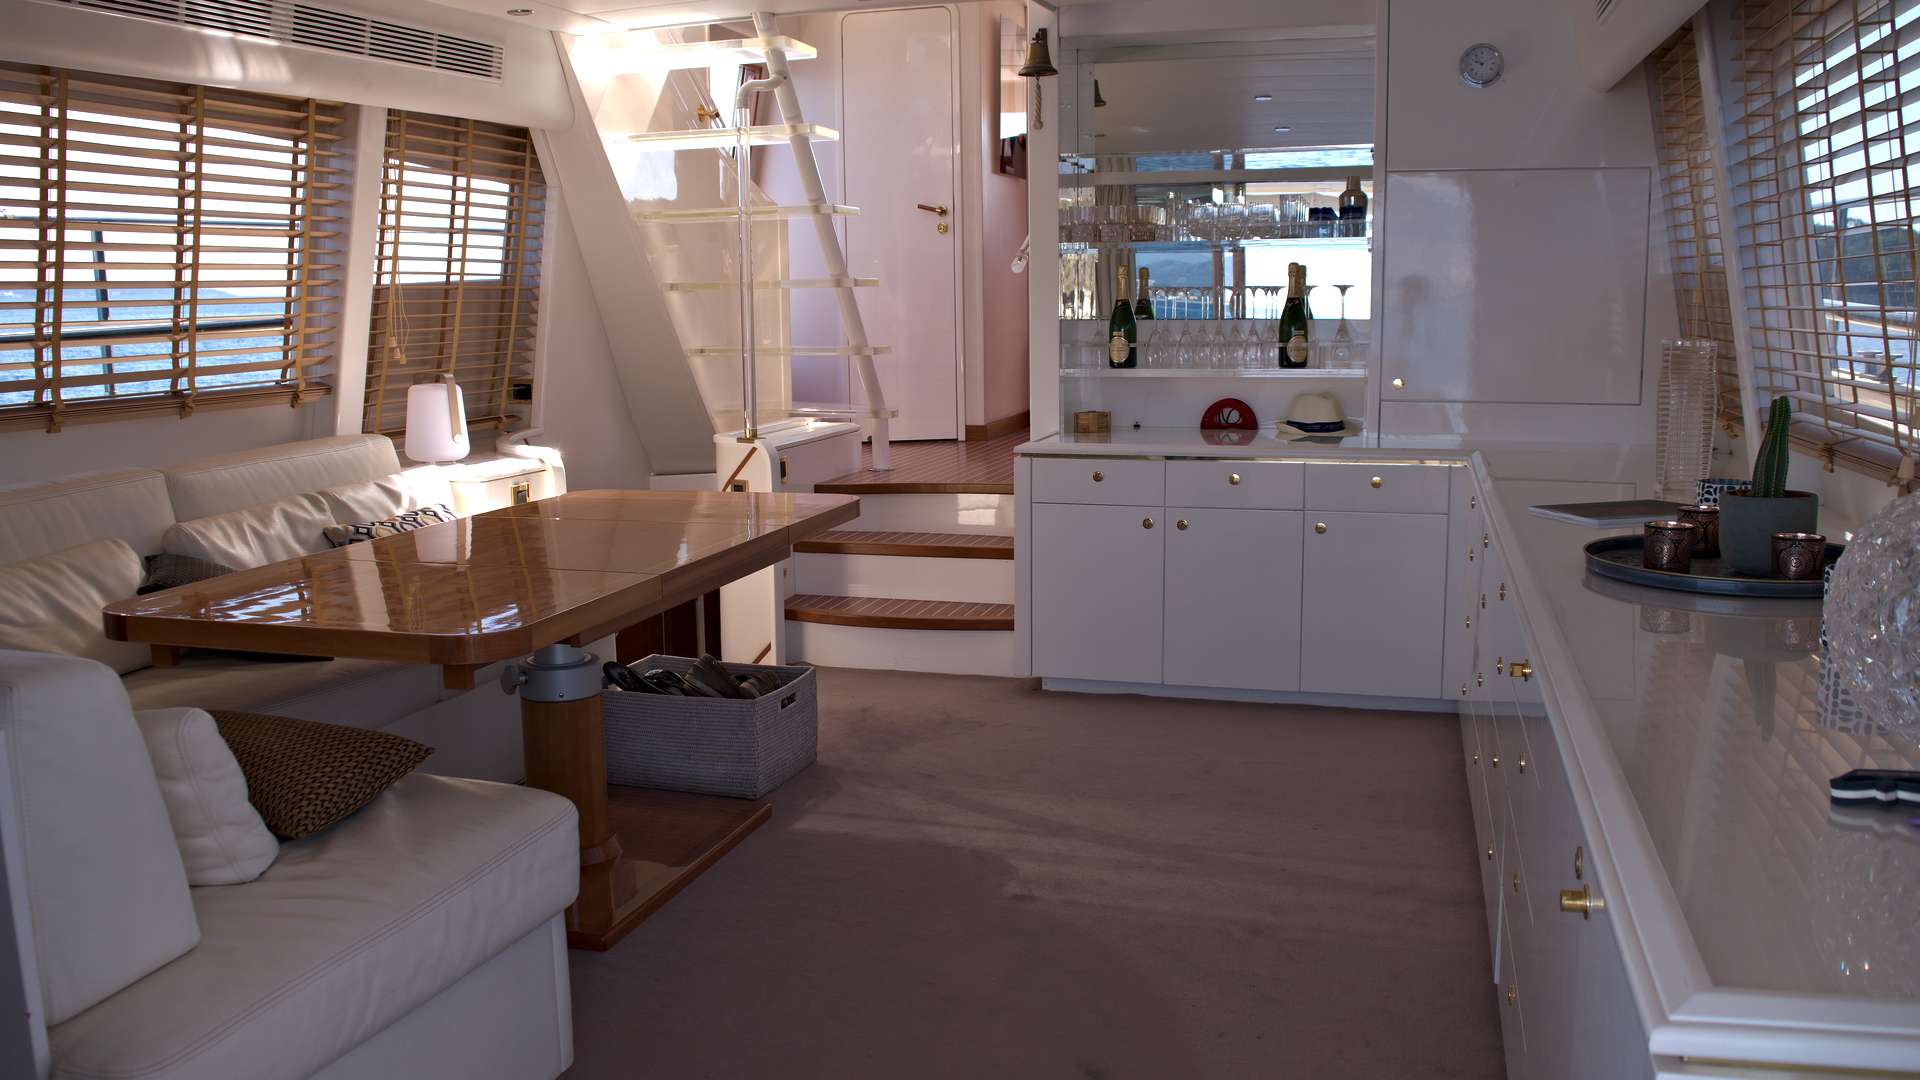 Joia V - Yacht Charter Antibes & Boat hire in Fr. Riviera, Corsica & Sardinia 2